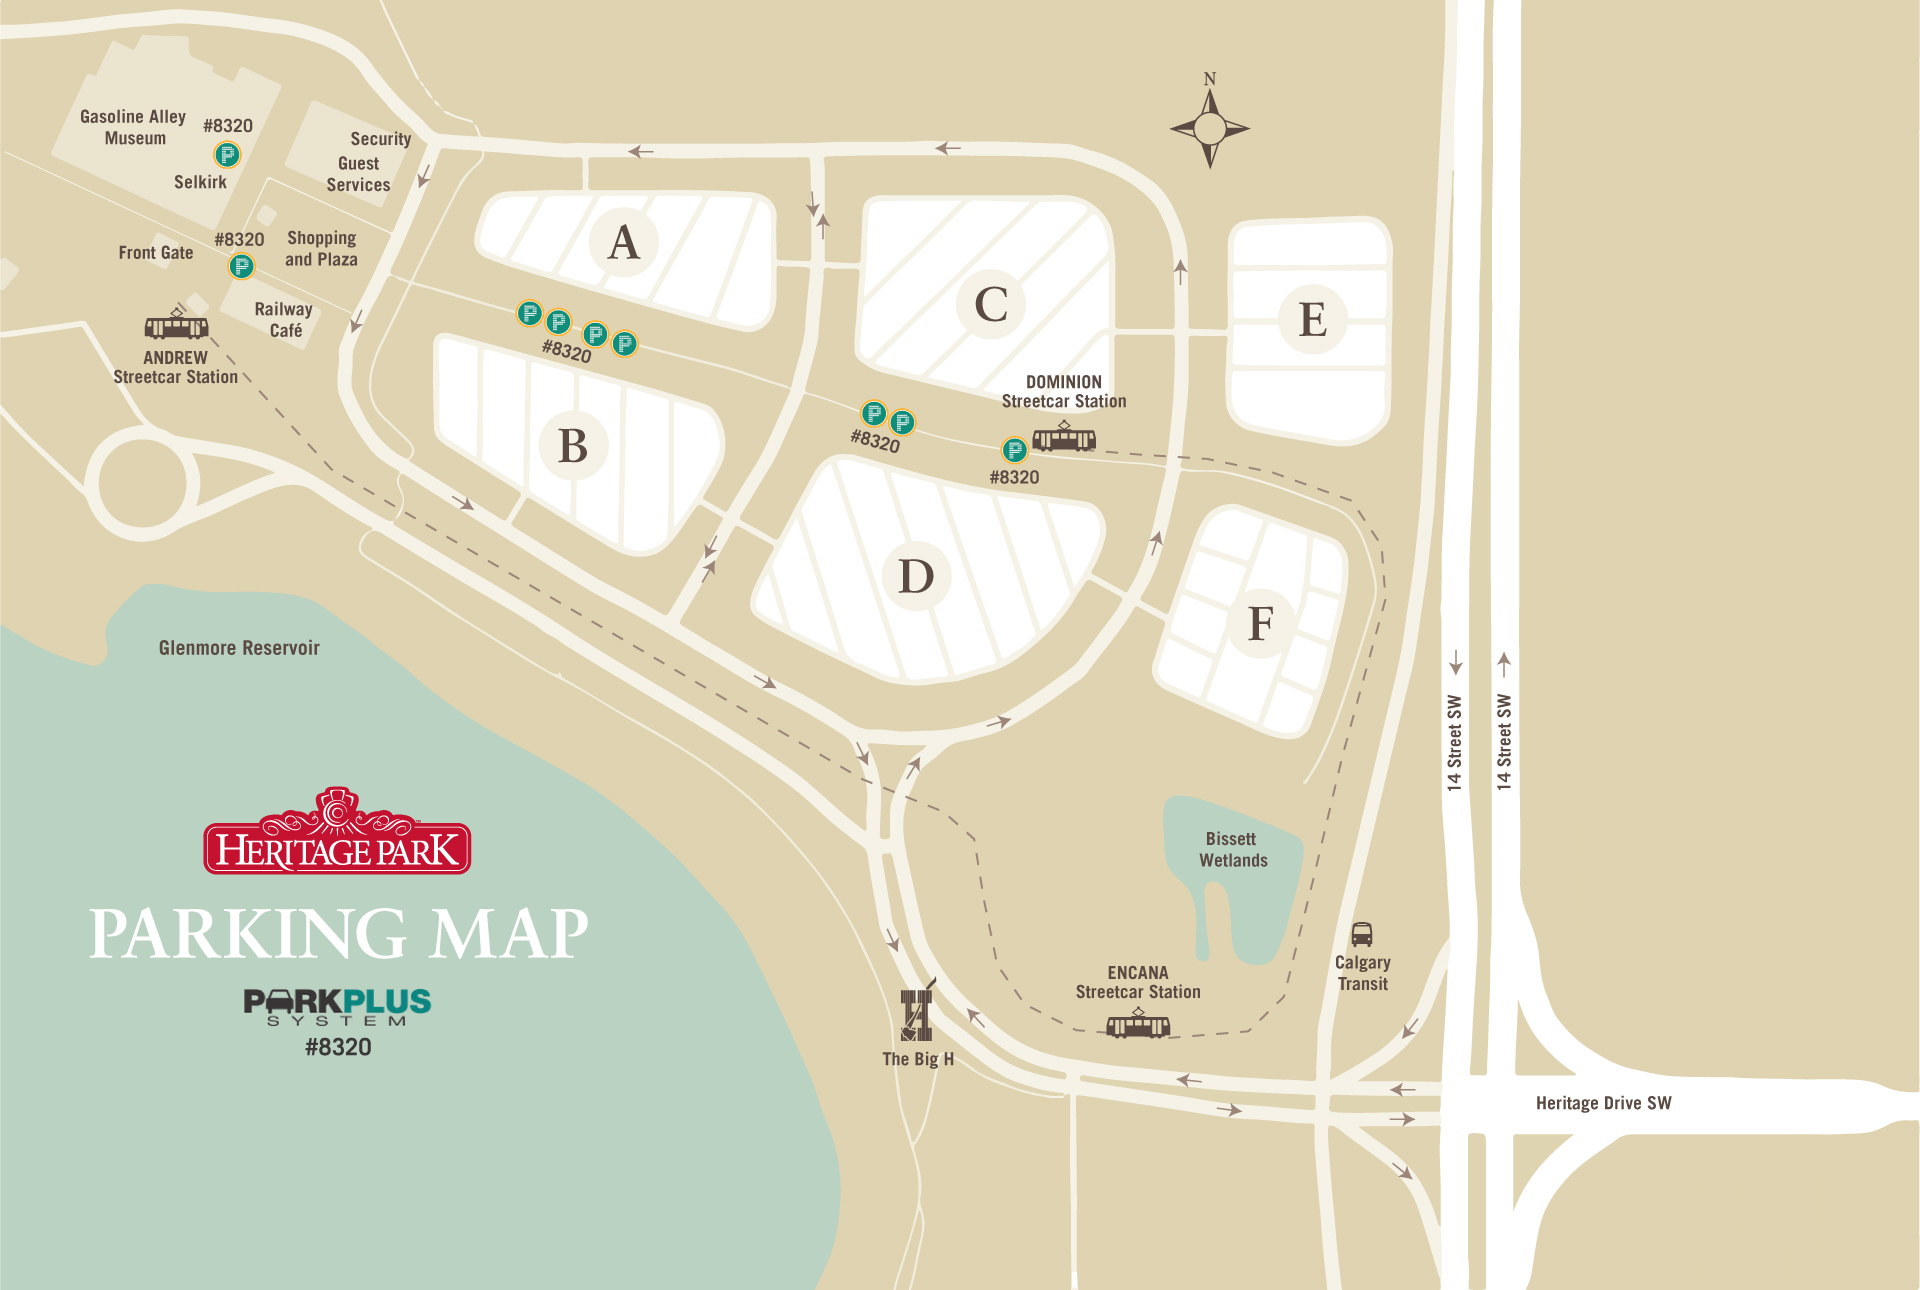 A map of the parking lots at Heritage Park